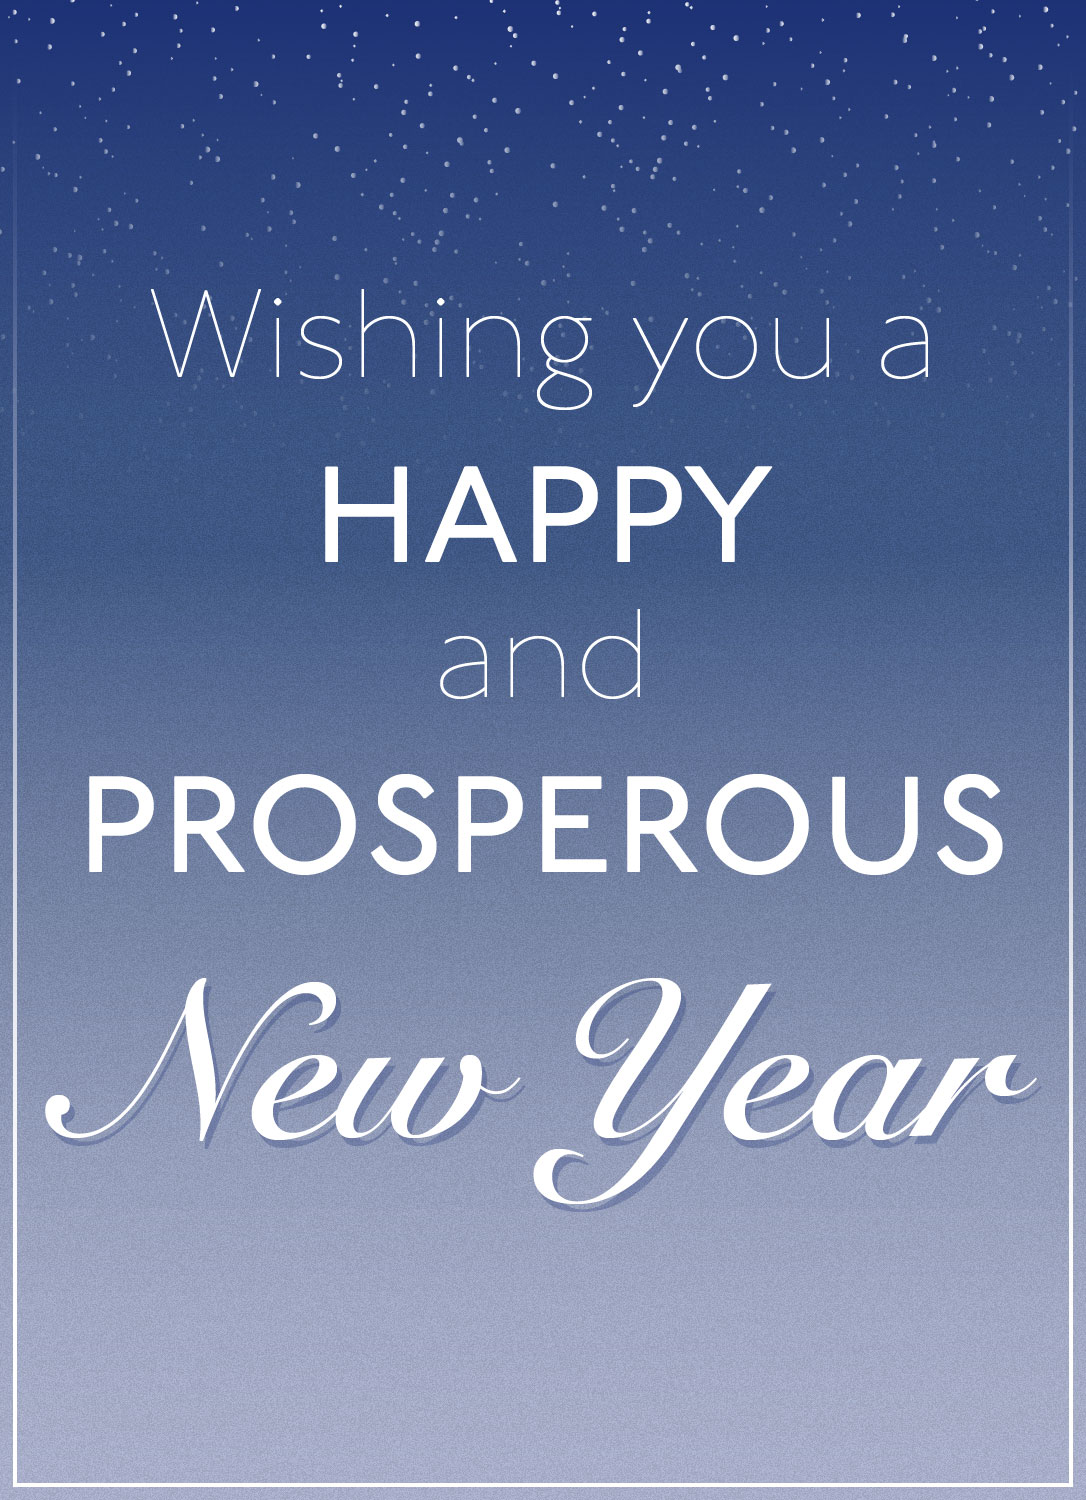 Happy & Prosperous New Year - Inspiration Nation - Digital Cards